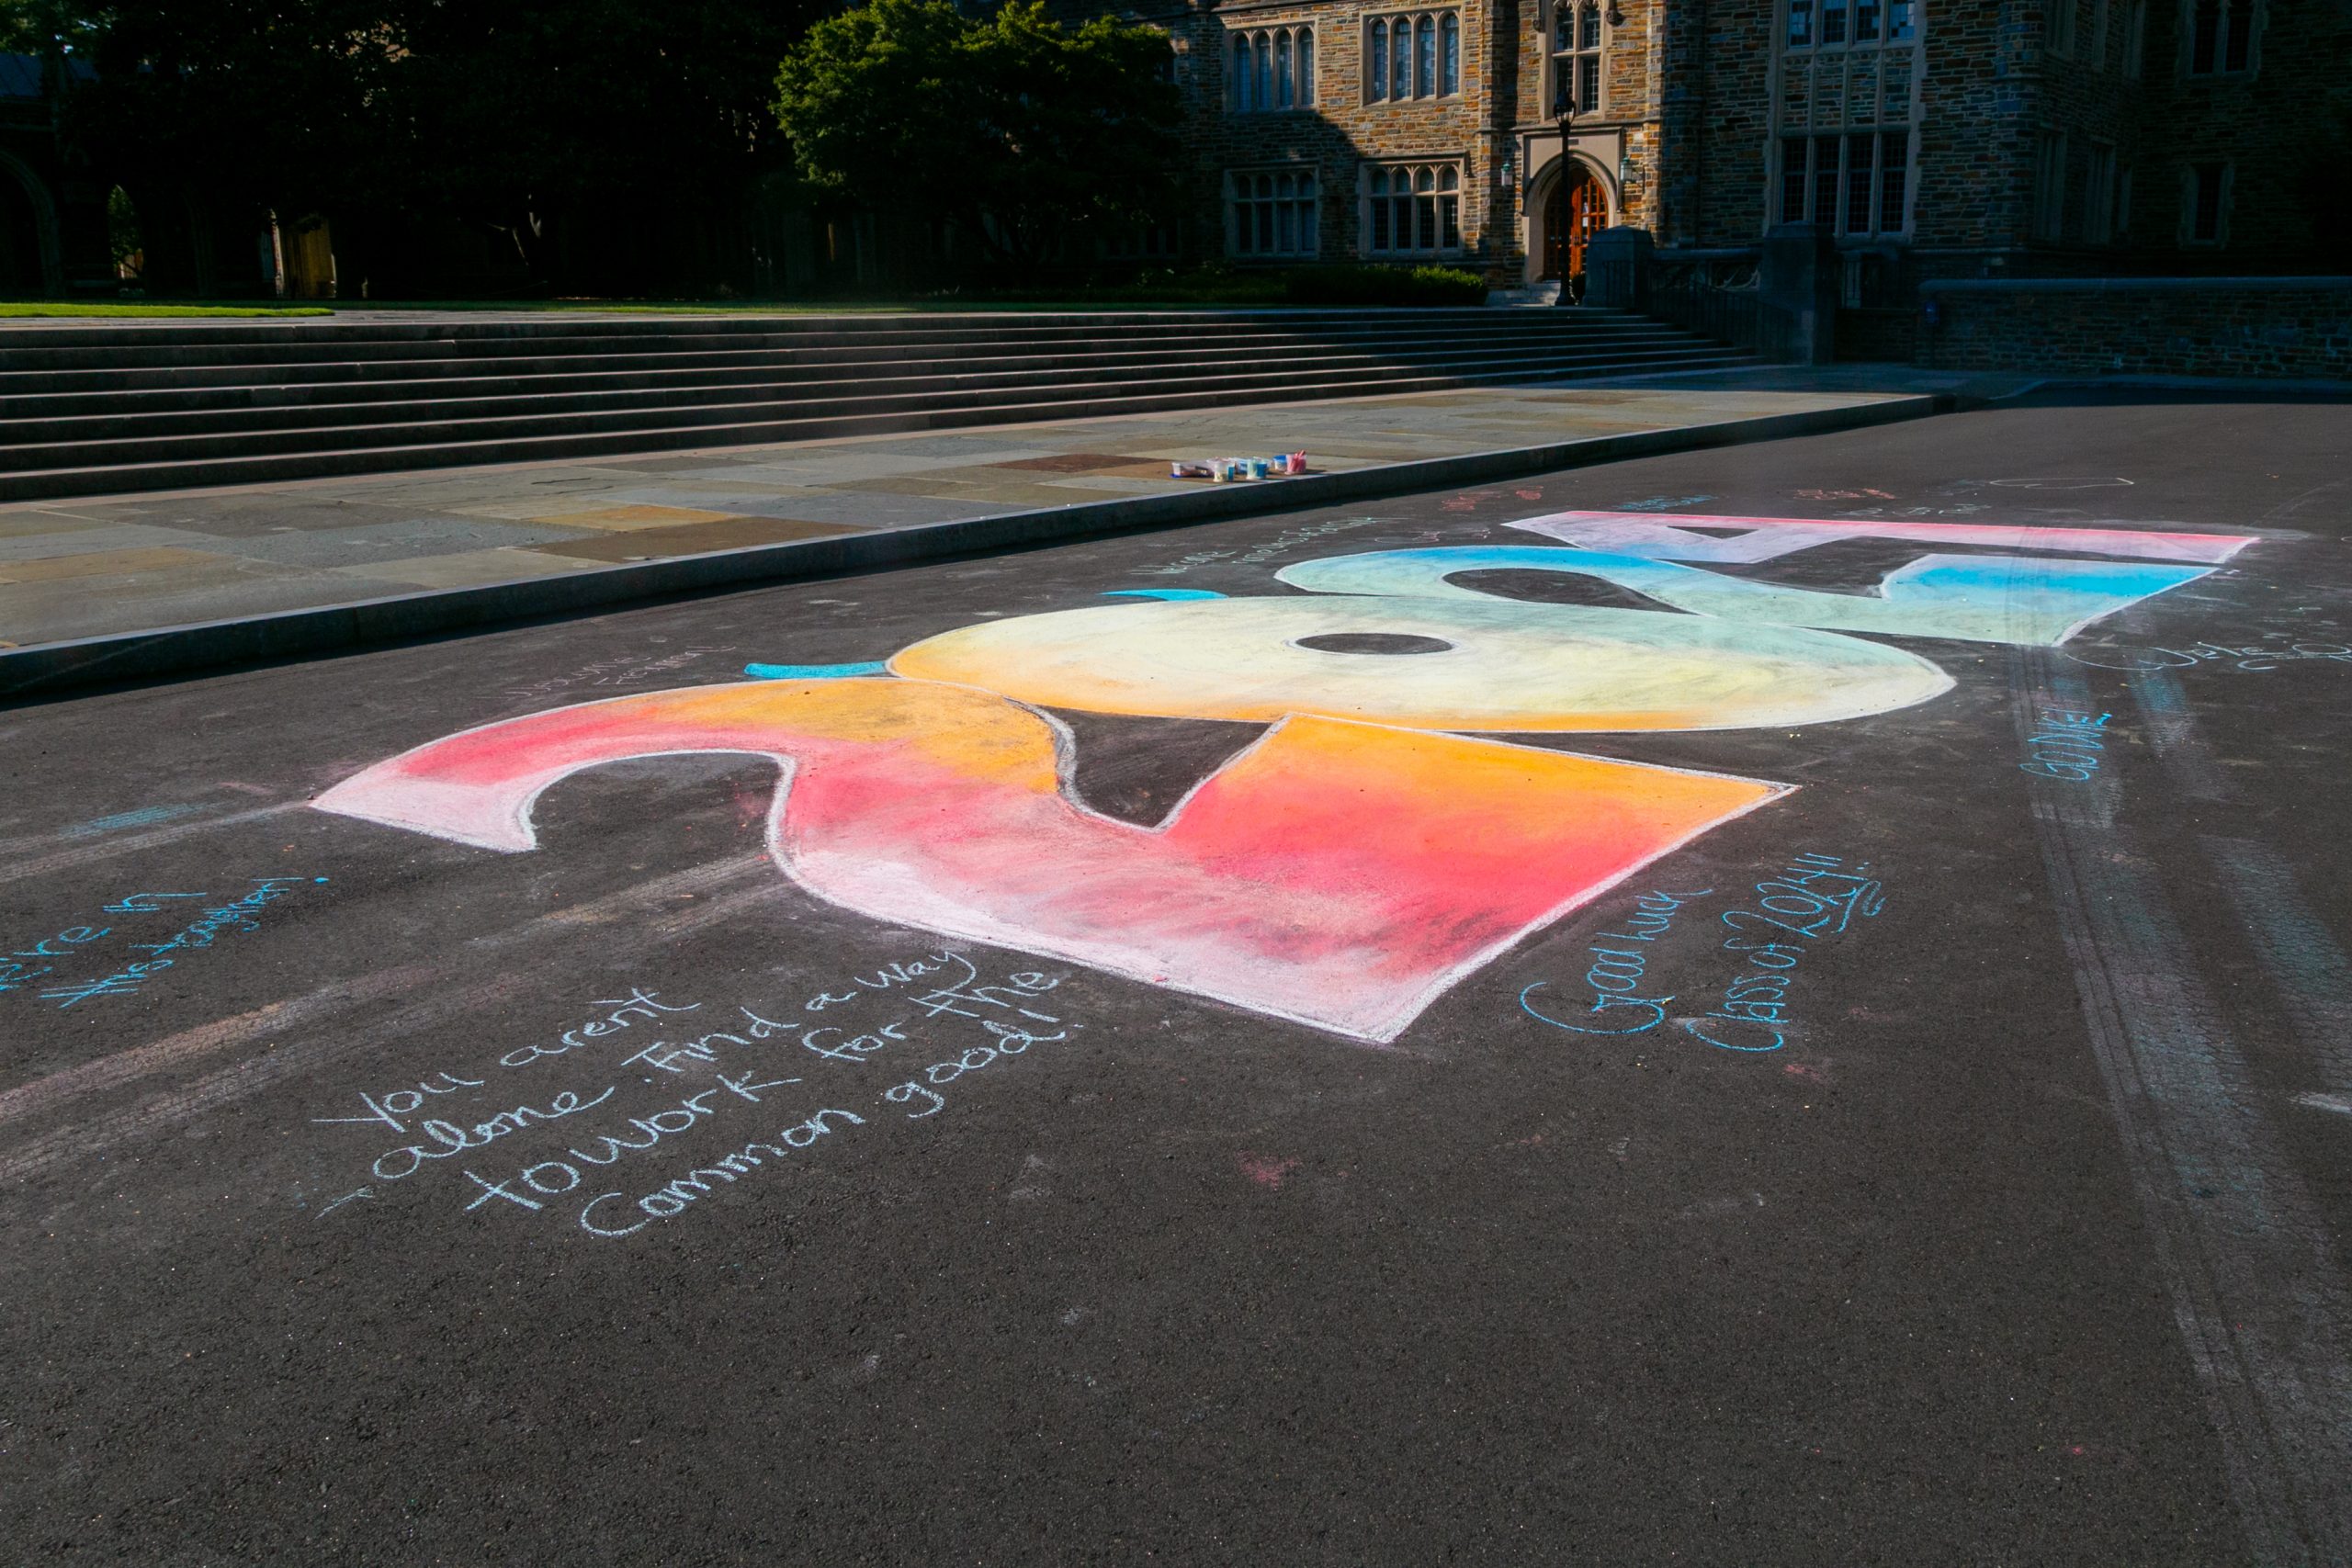 The photo shows the hand-written messages around the chalk mural.